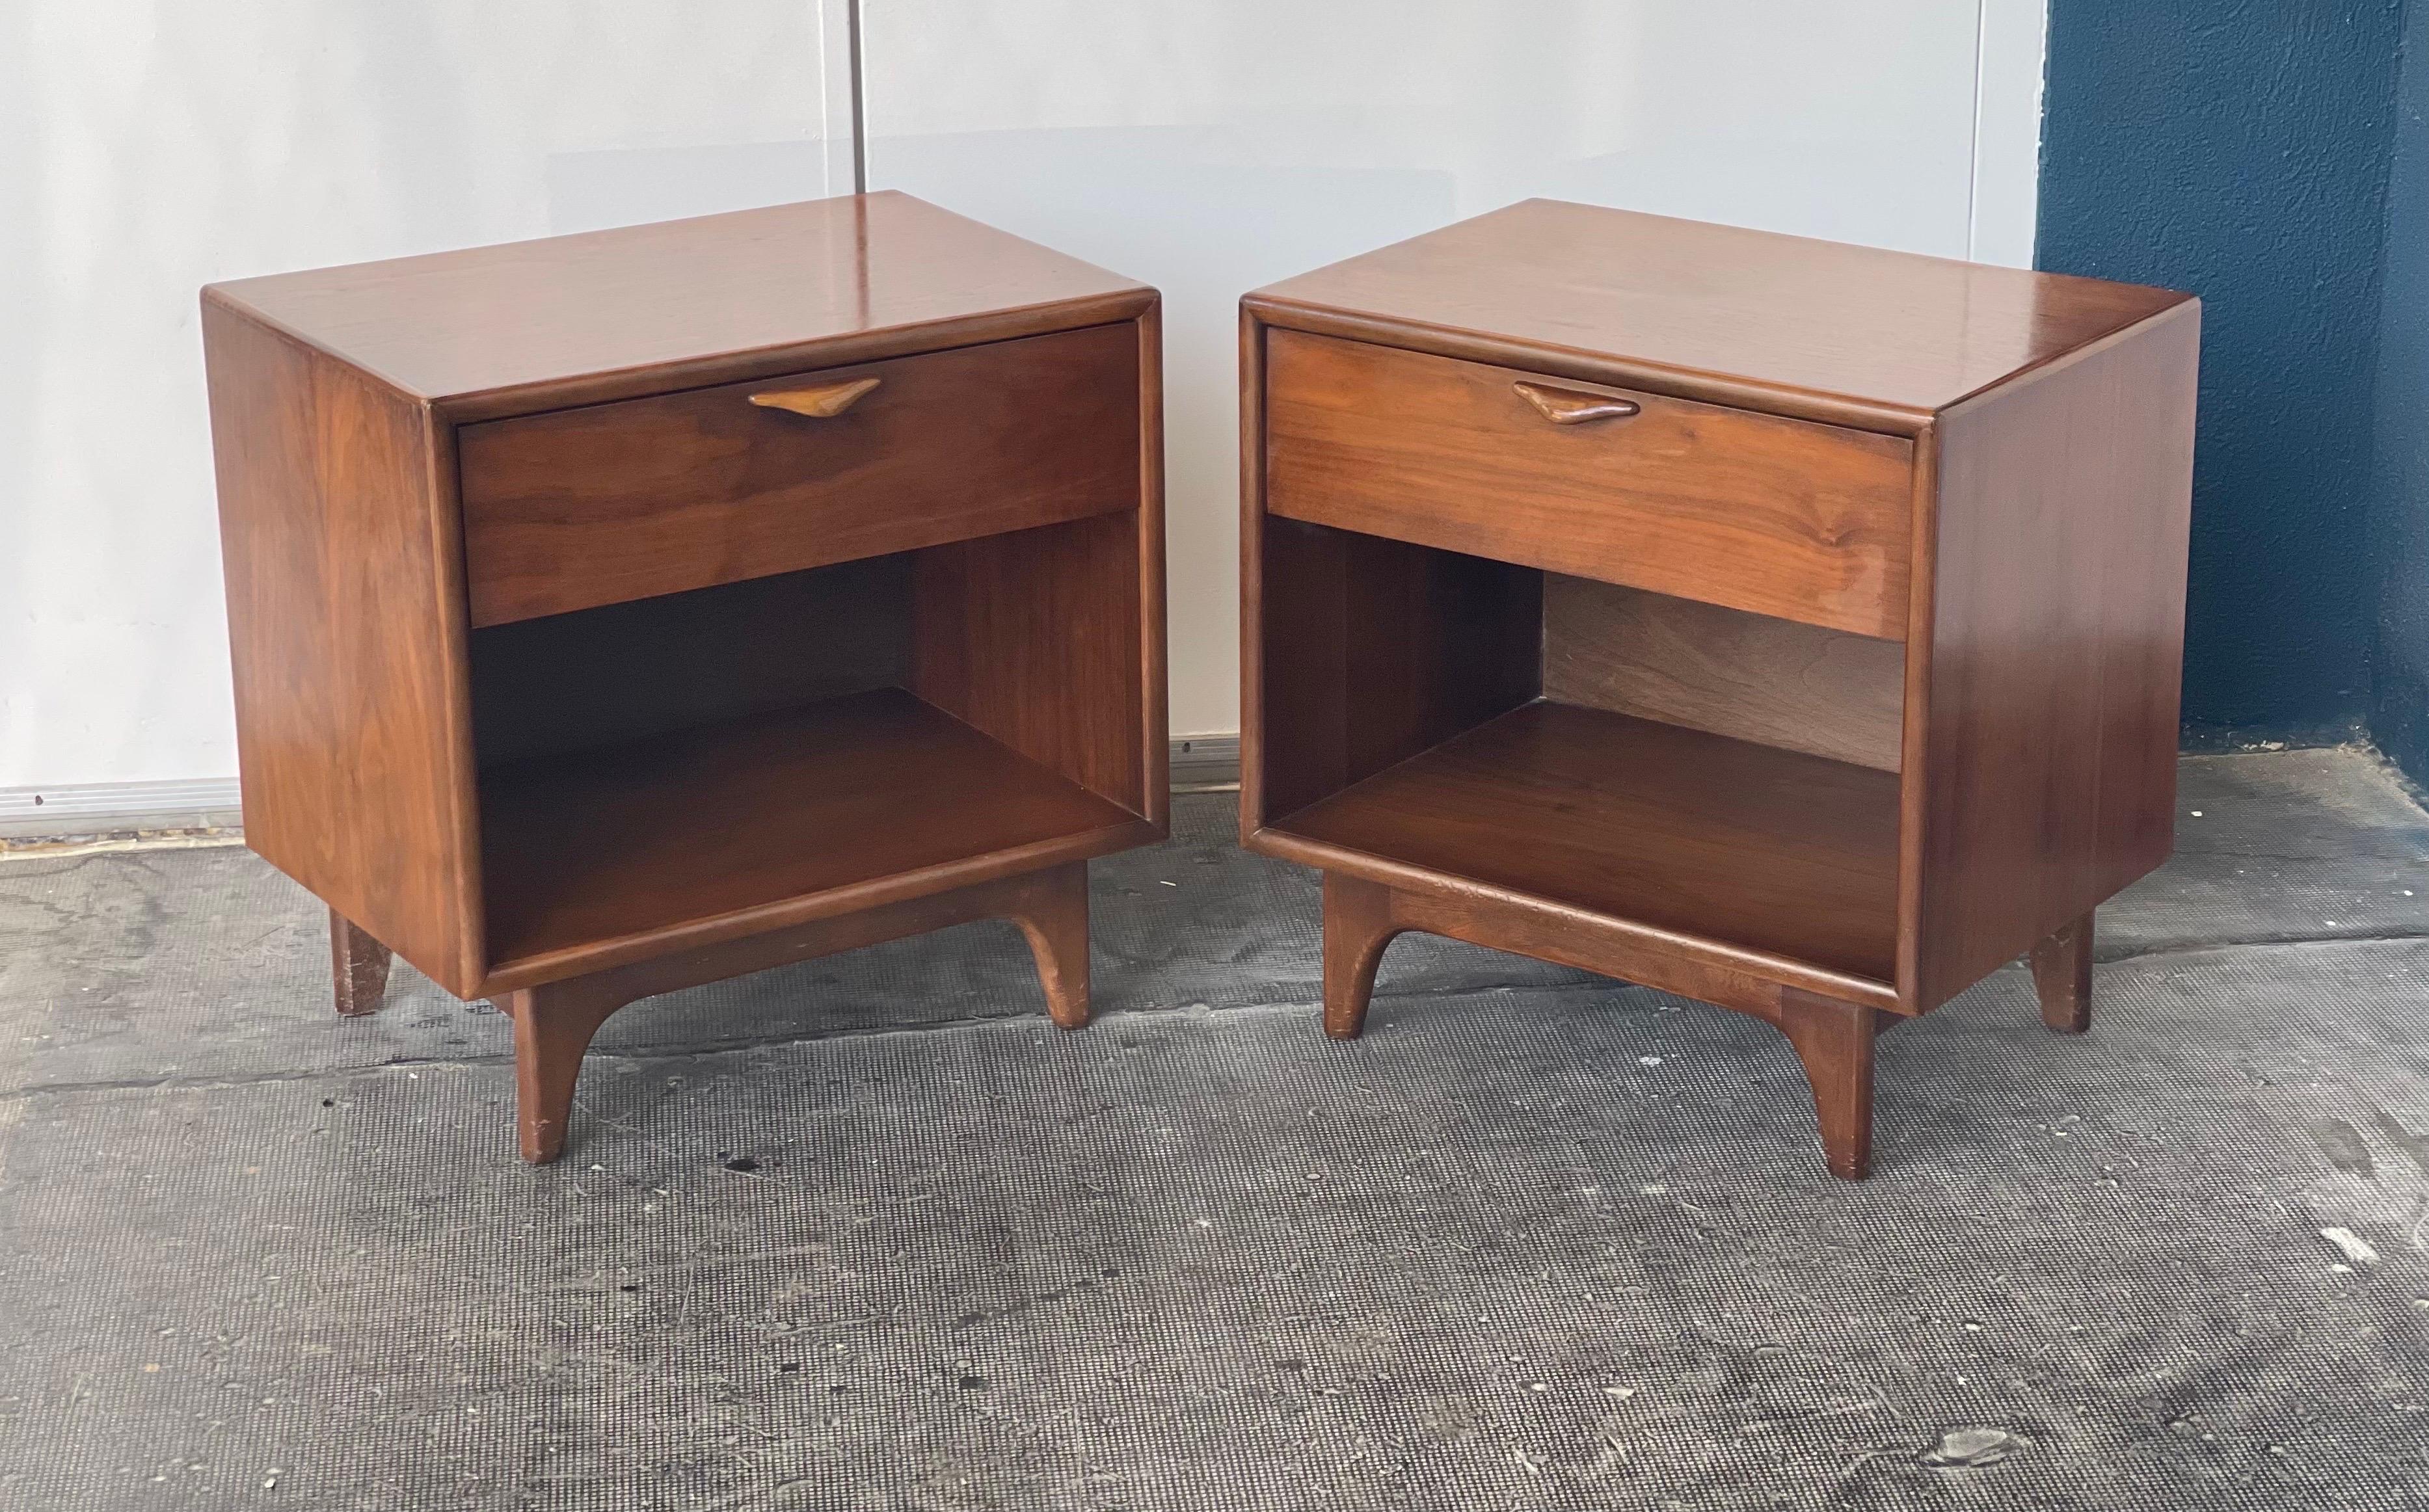 Vintage Mid-Century Modern Walnut End Table Set. Dovetail Drawers by Lane.

Dimensions. 22 W ; 15 D ; 22 H.